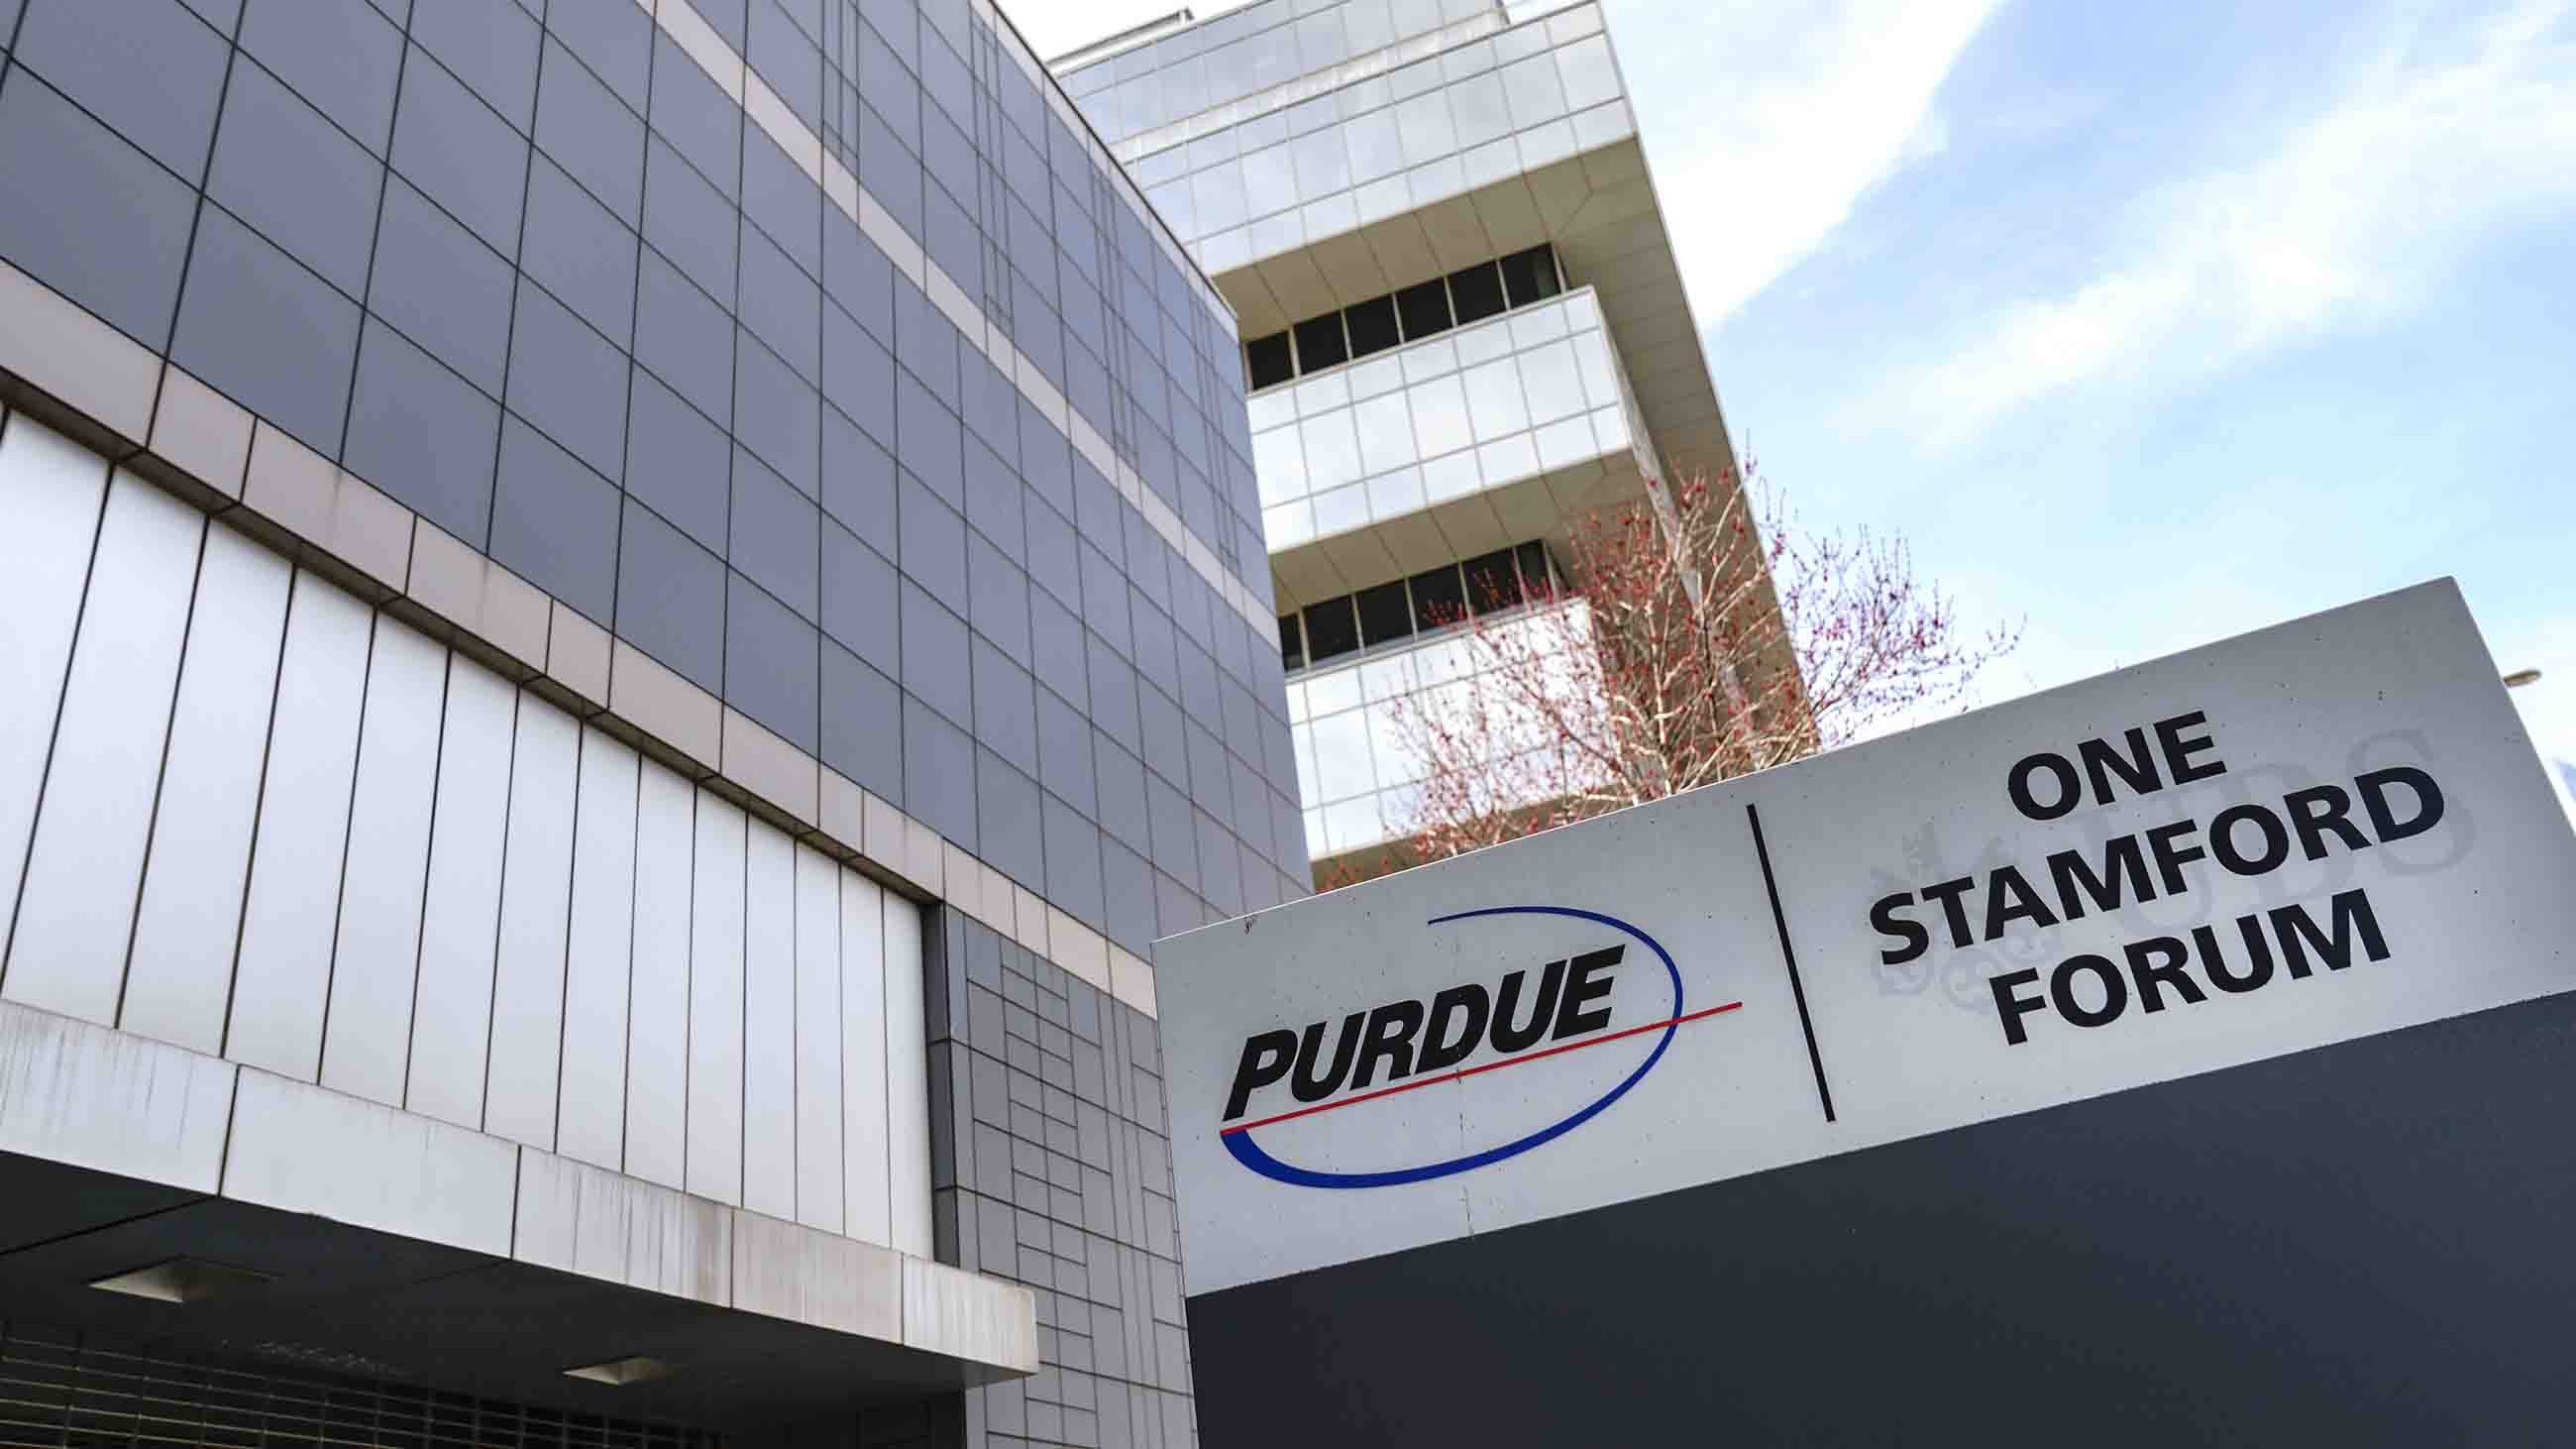 For Purdue Pharma, Lawsuits and Criticism Mount